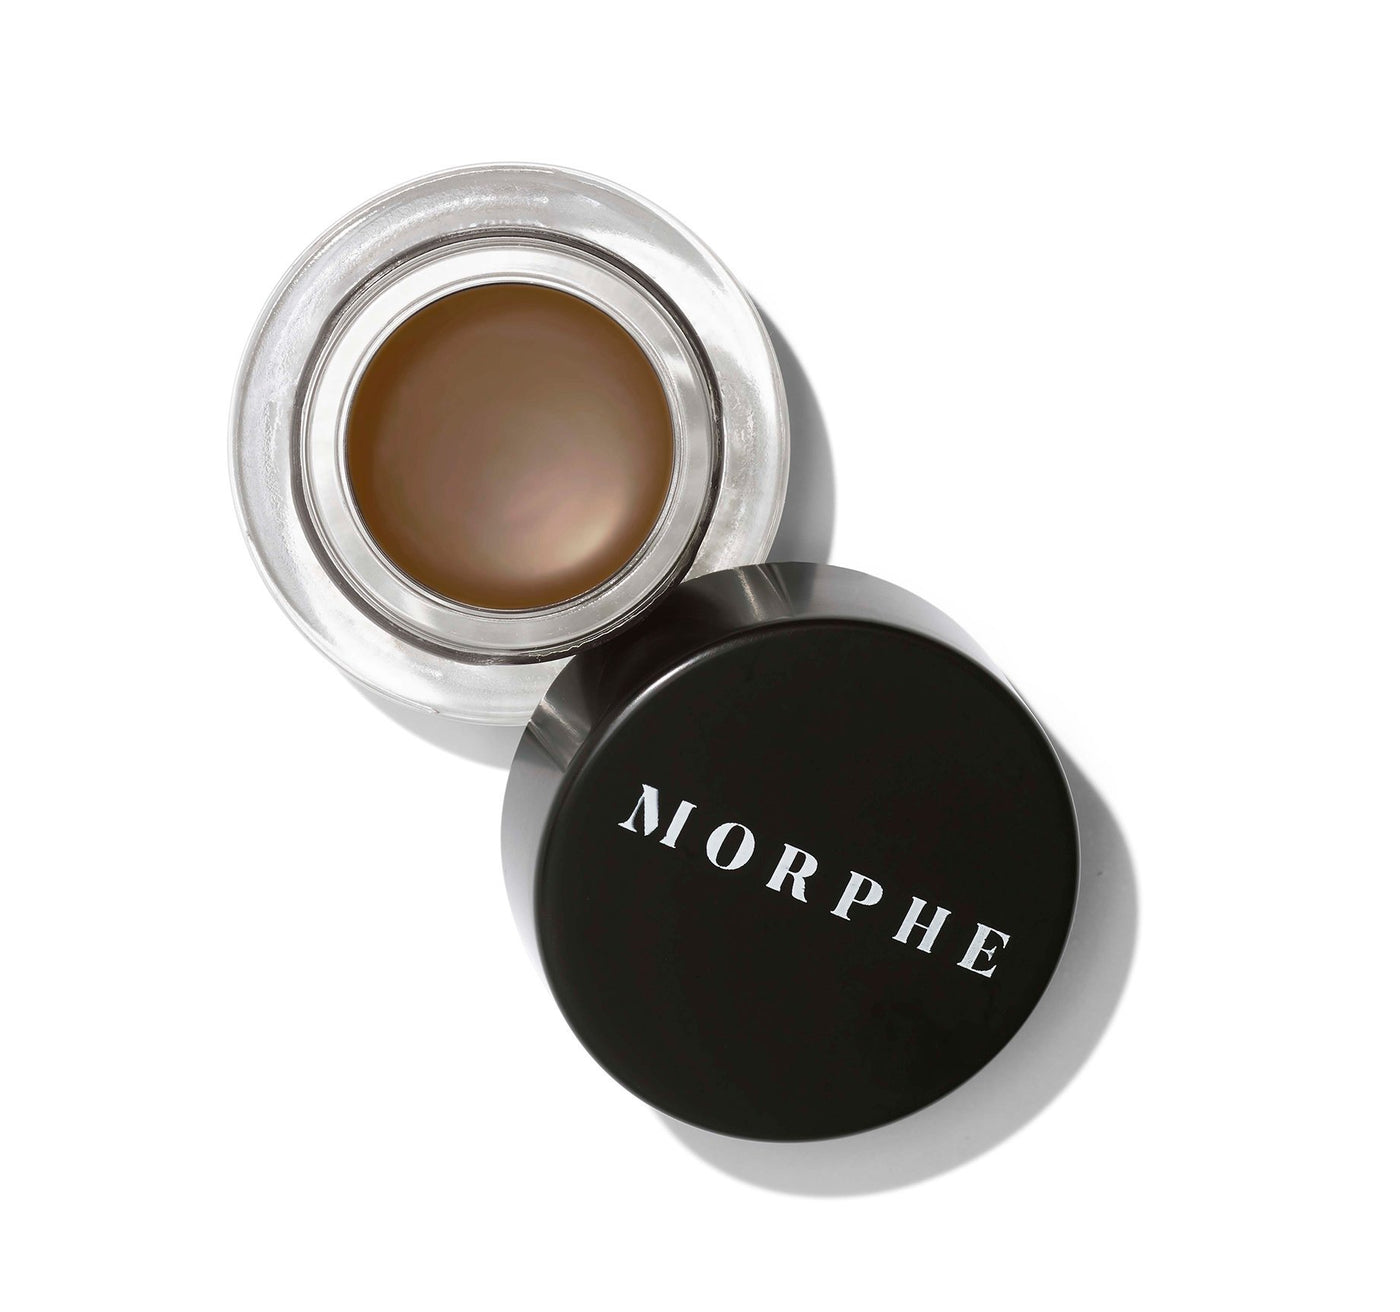 Morphe Arch Obsessions Eyebrow Kit